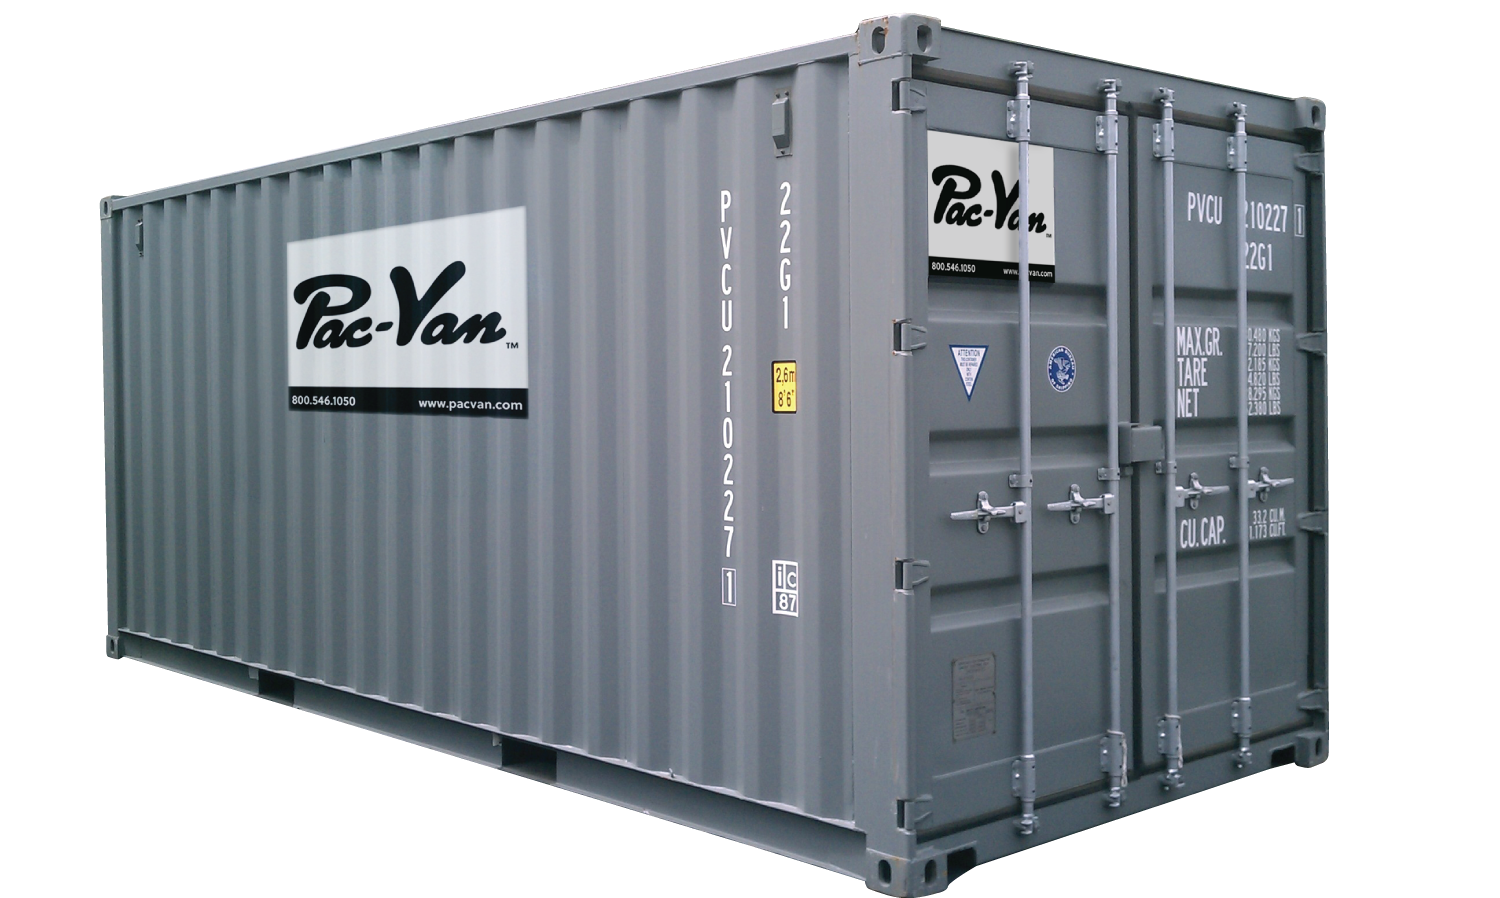 pac van containers